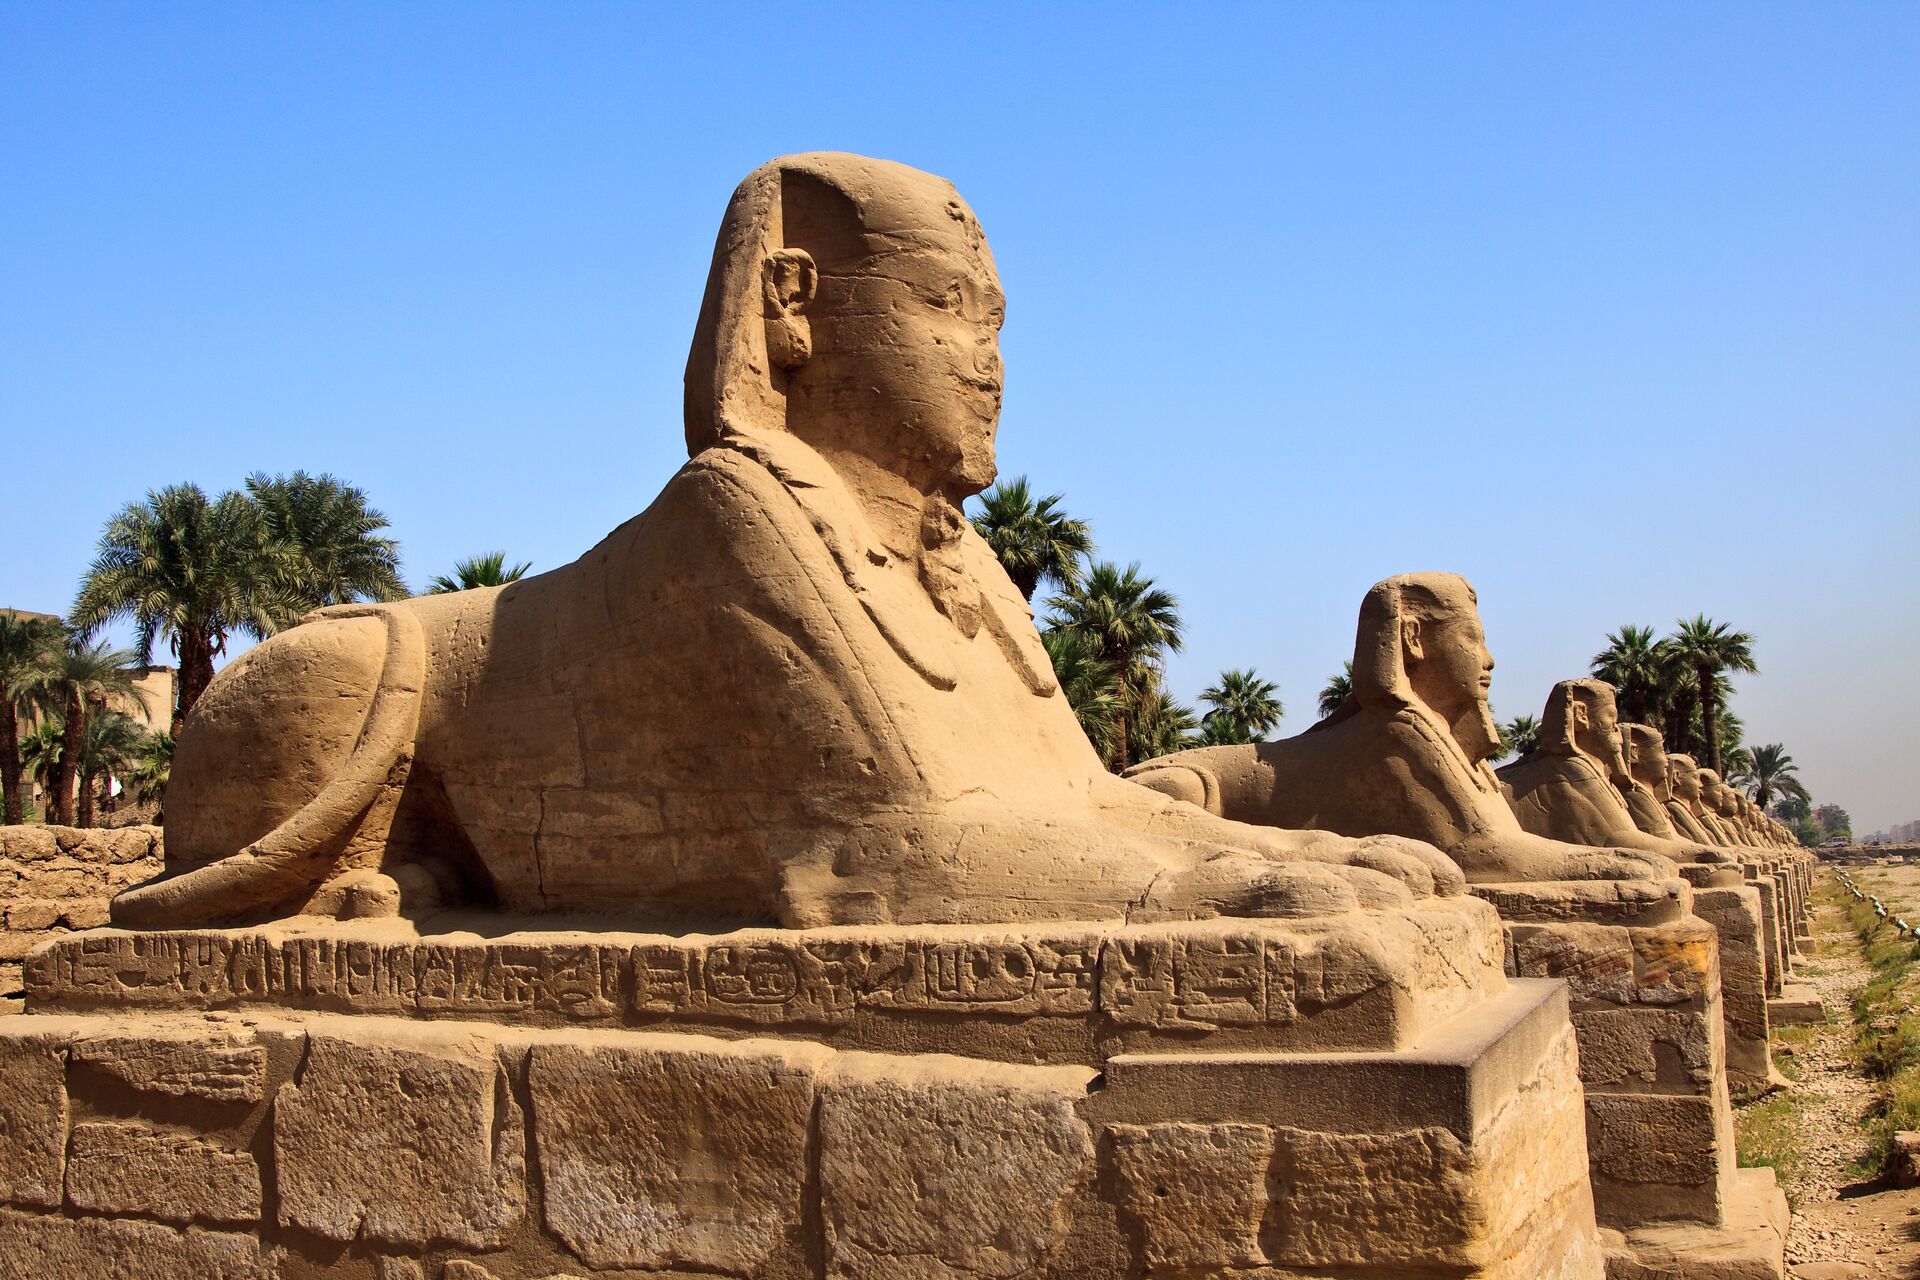 Image of Avenue of the Sphinxes, Egypt showing a row of sphinxes against a bright blue sky